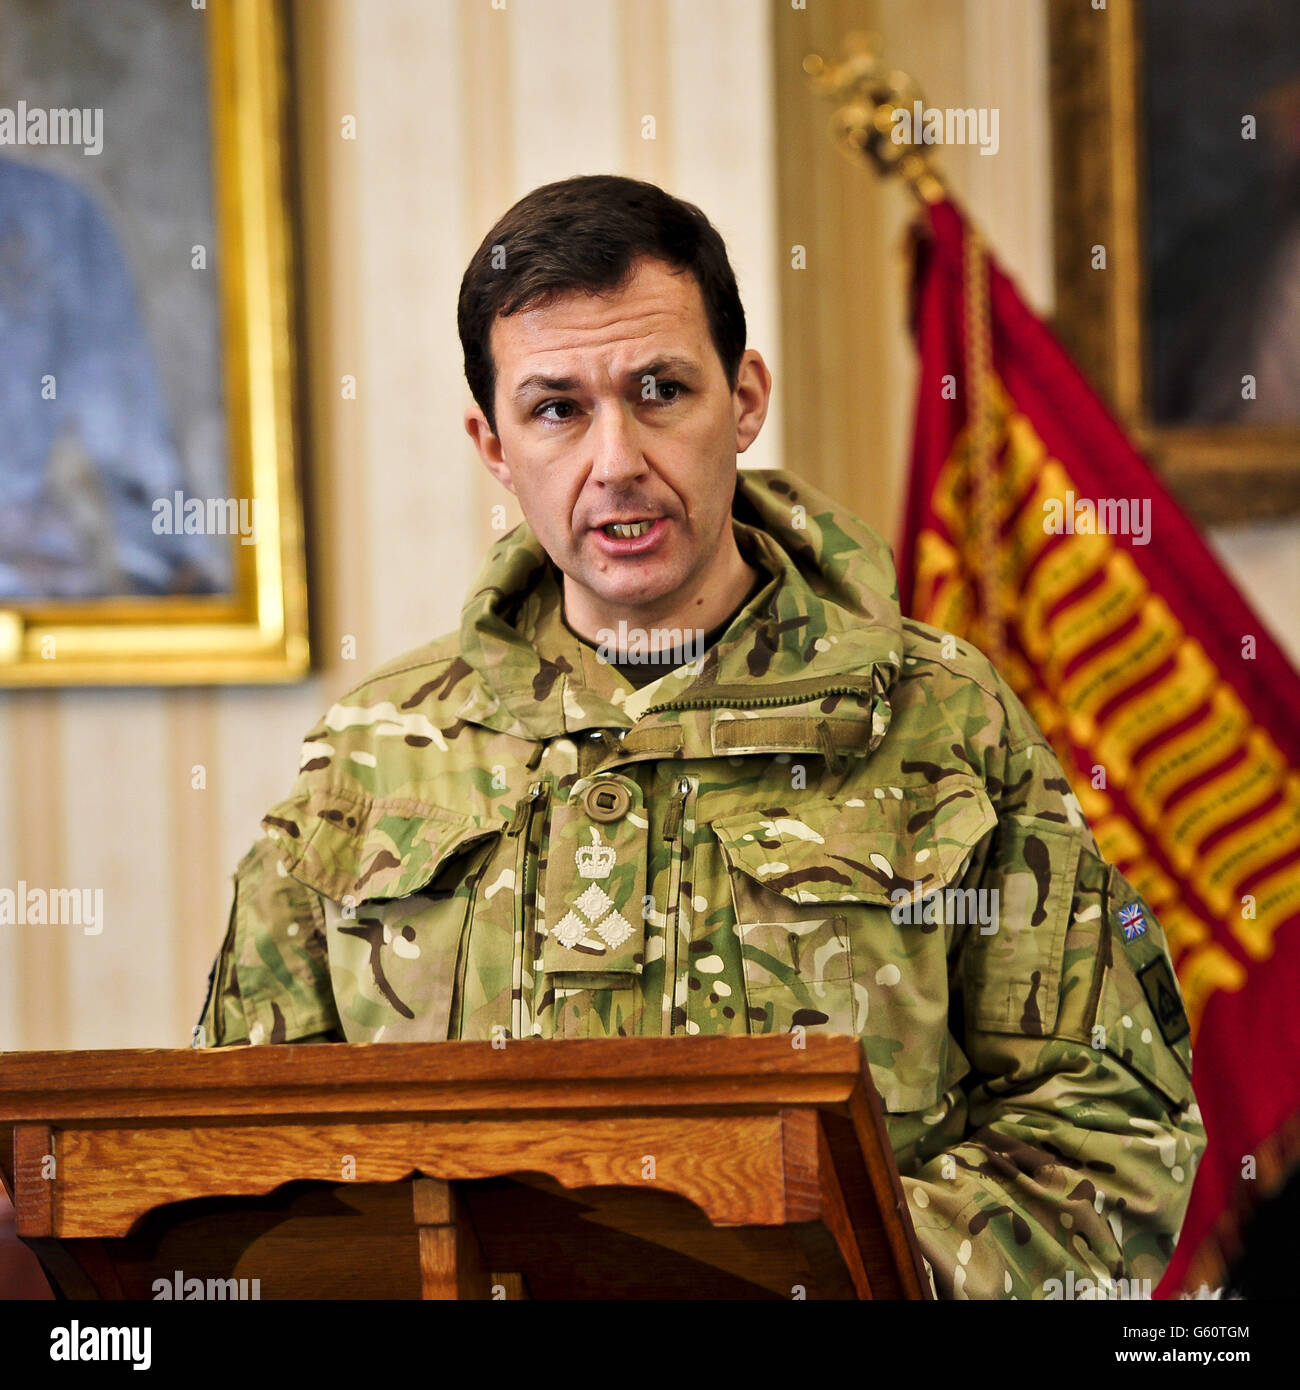 Brigadier Doug Chalmers speaks at a press conference at Buller Barracks, Aldershot, which the family of Lance Corporal James Ashworth attended, as he is awarded the Victoria Cross in recognition of his 'extraordinary courage' while serving with the 1st Battalion The Grenadier Guards in Helmand province last year. Stock Photo